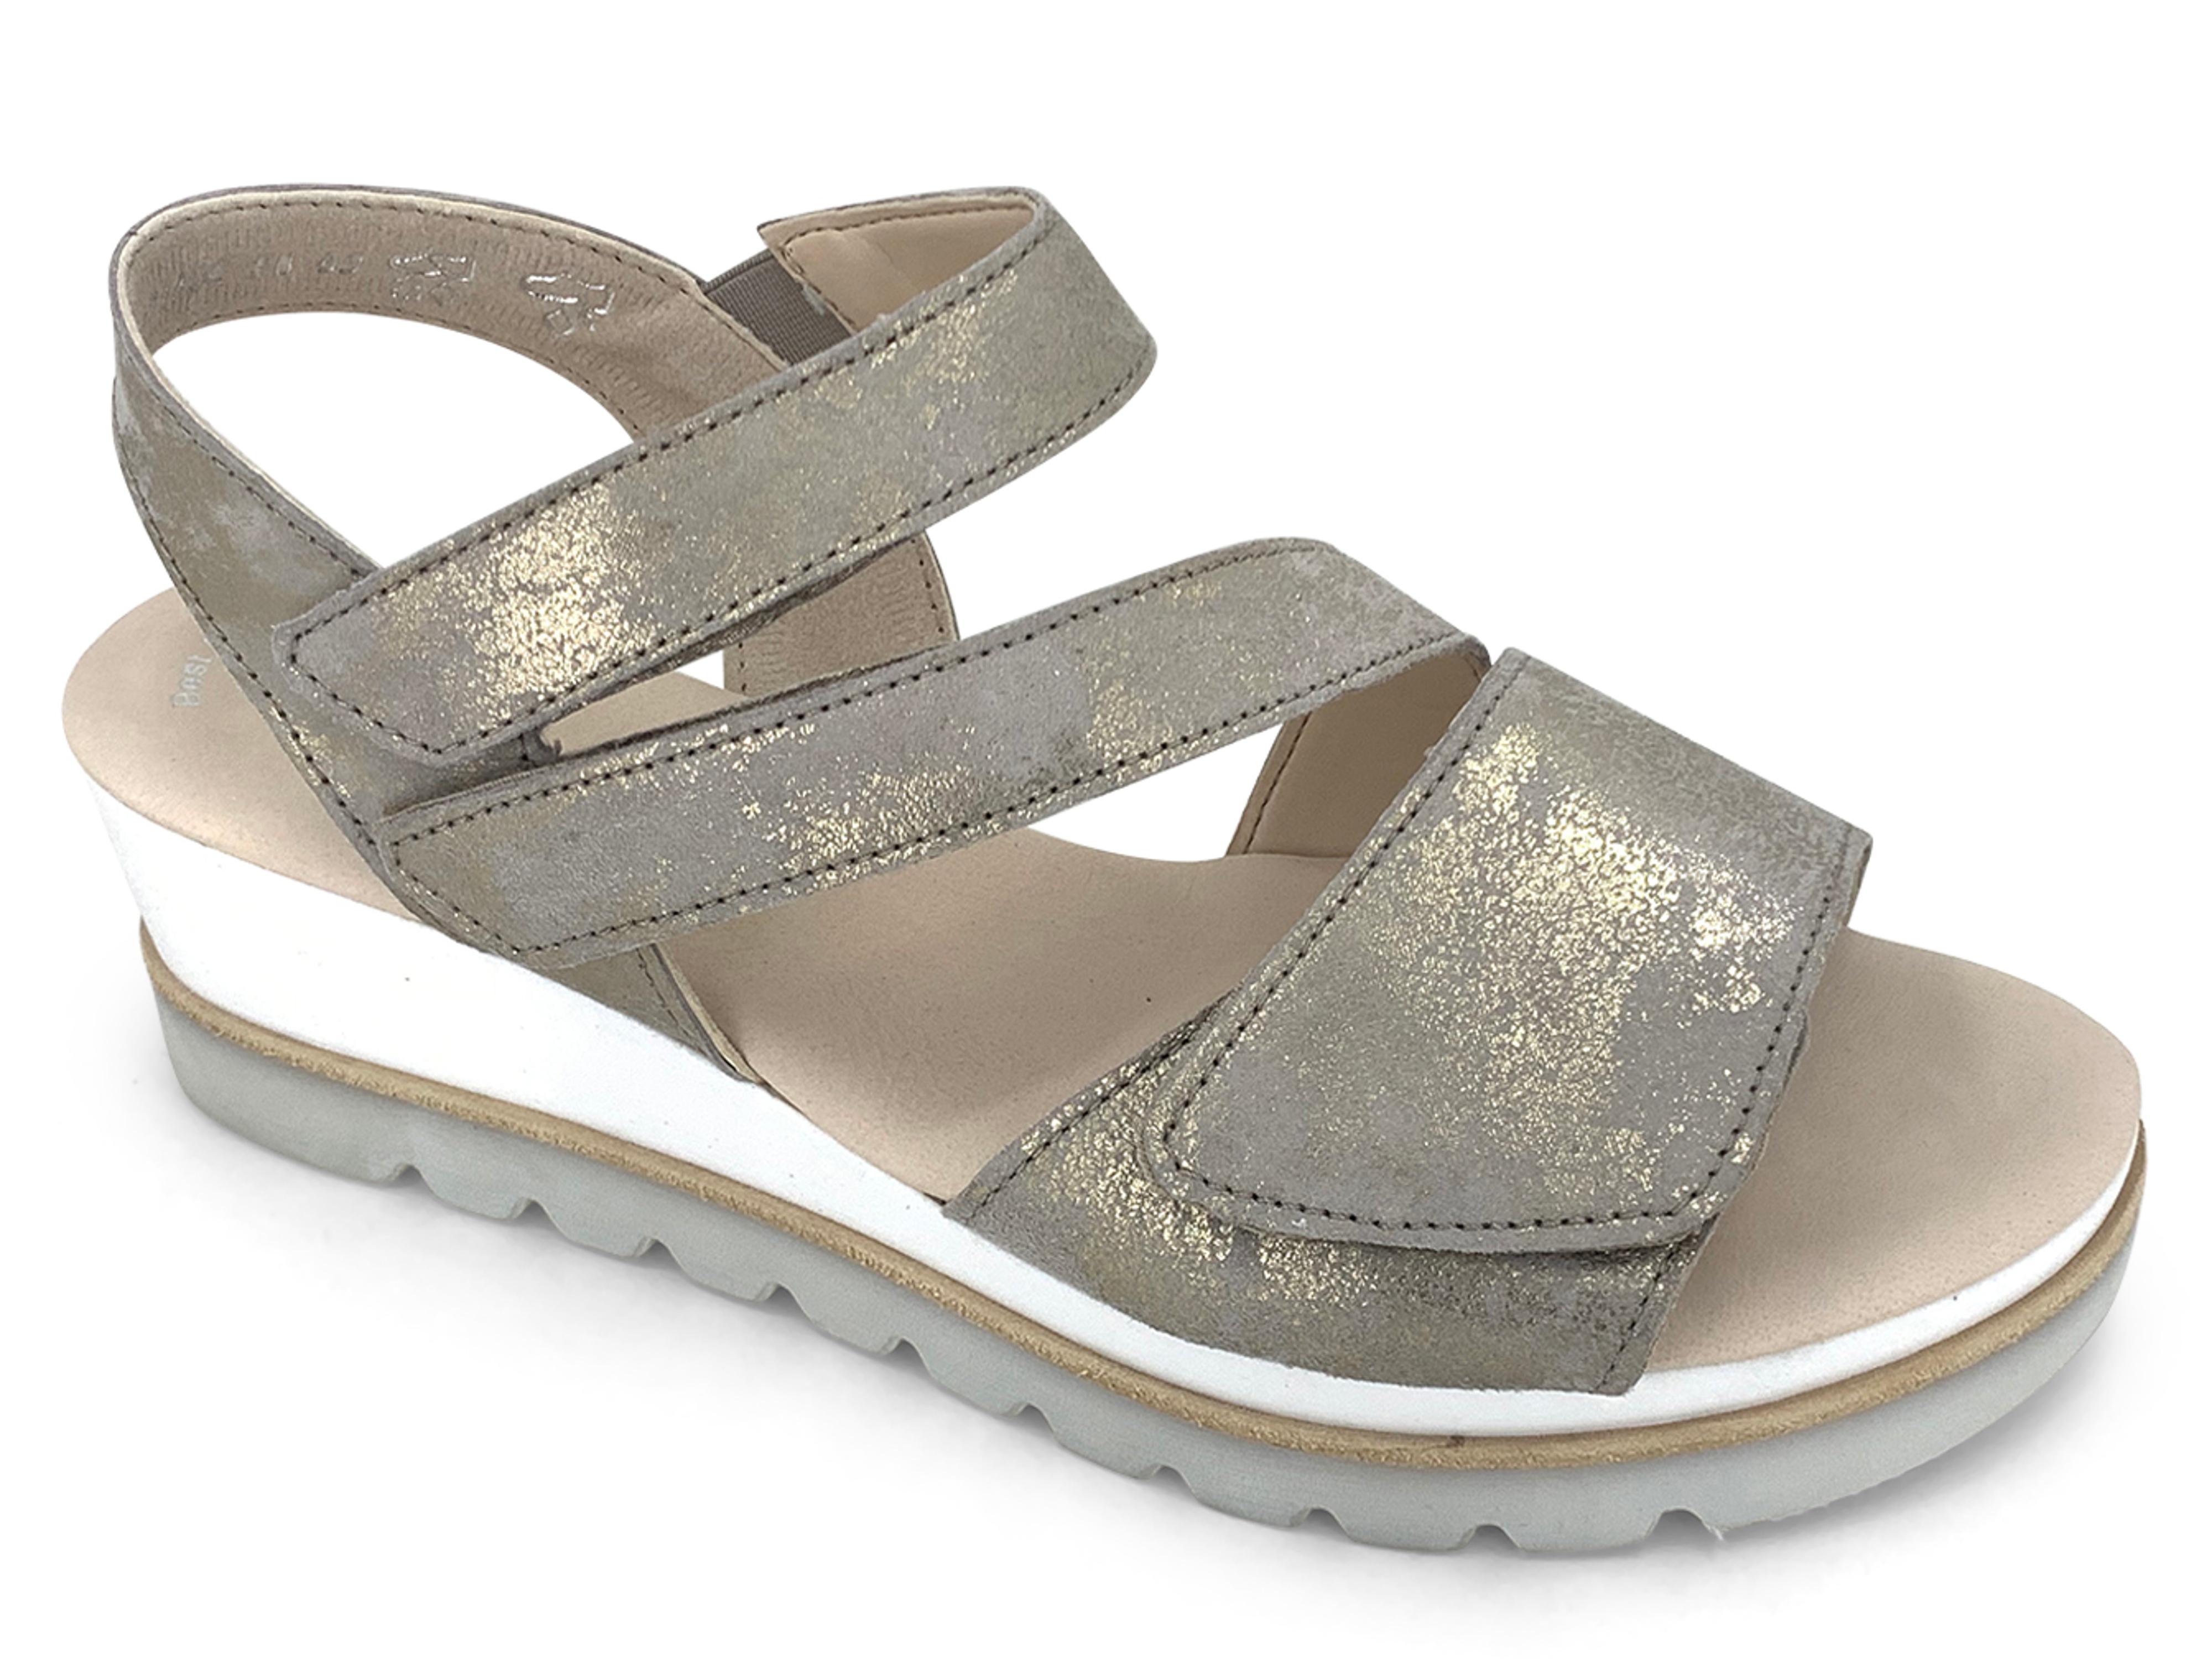 Women's Comfort Shoes - Popular Designers, Latest Trends : The Shoe Spa